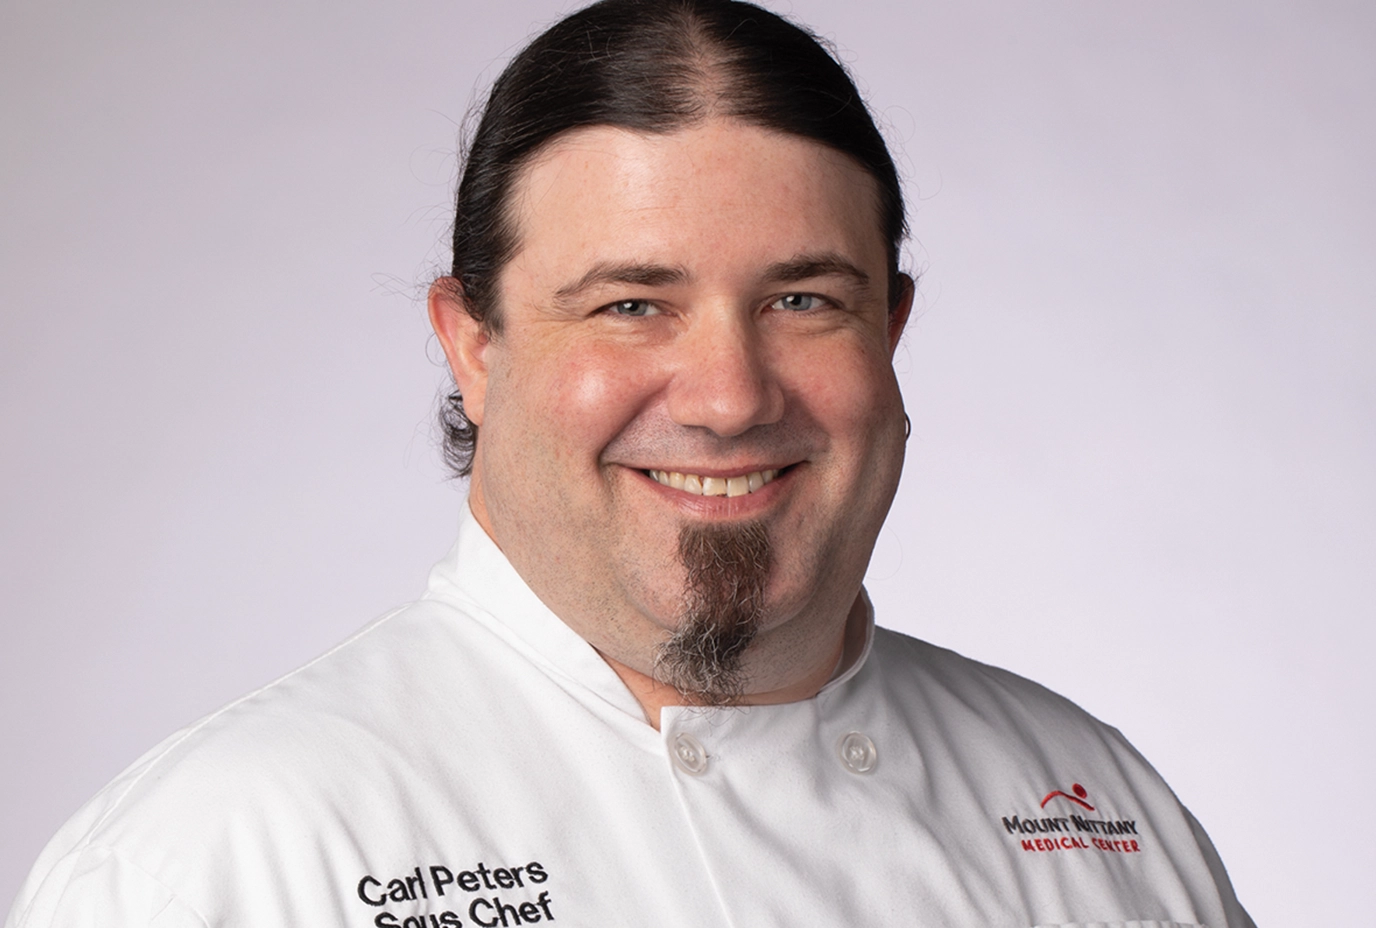 Carl Peters, Assistant Chef